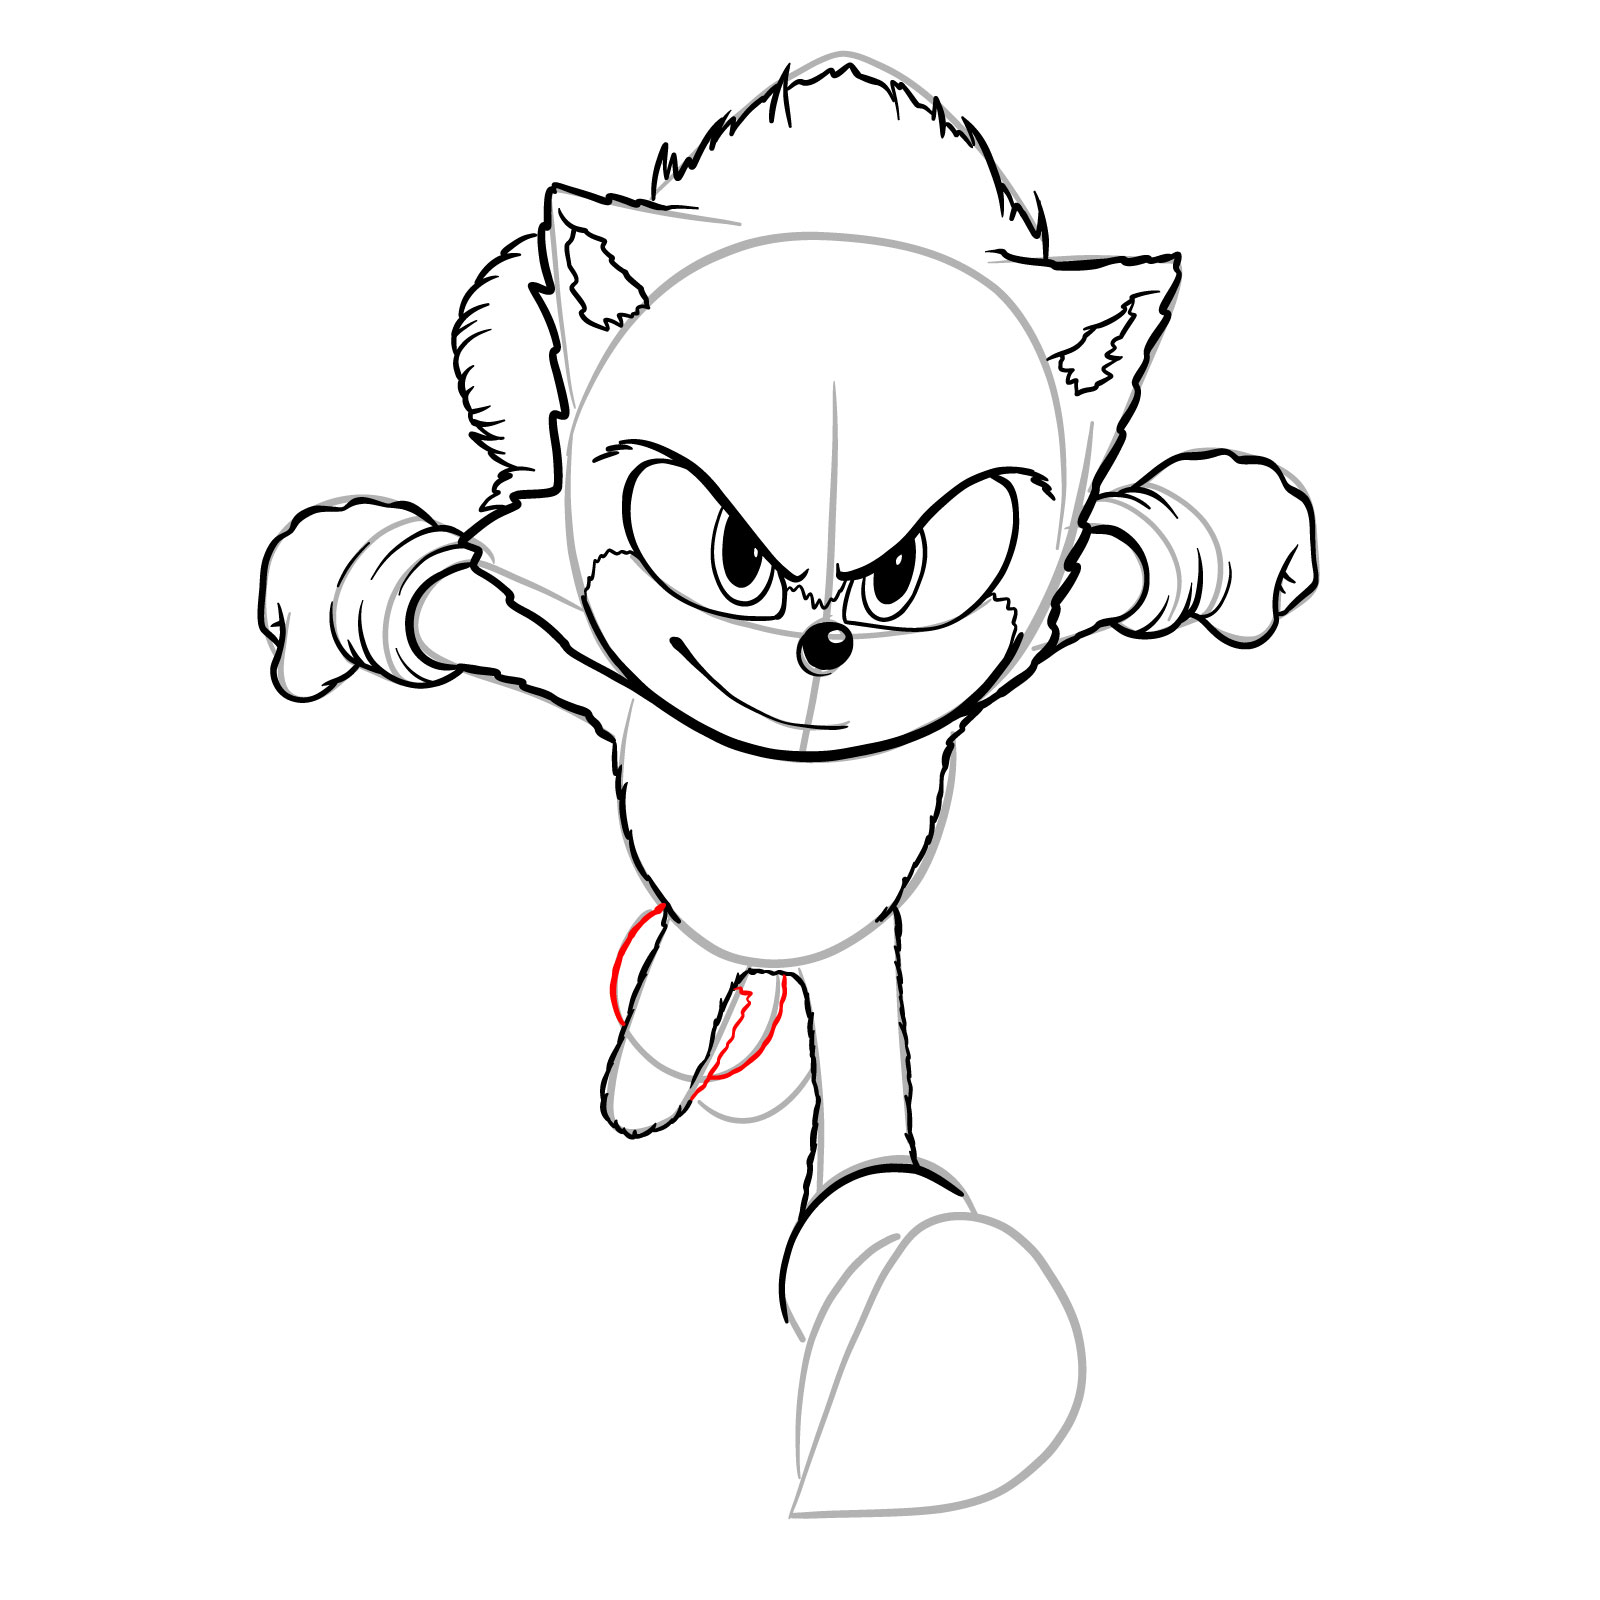 How to draw Sonic from the movie - step 23